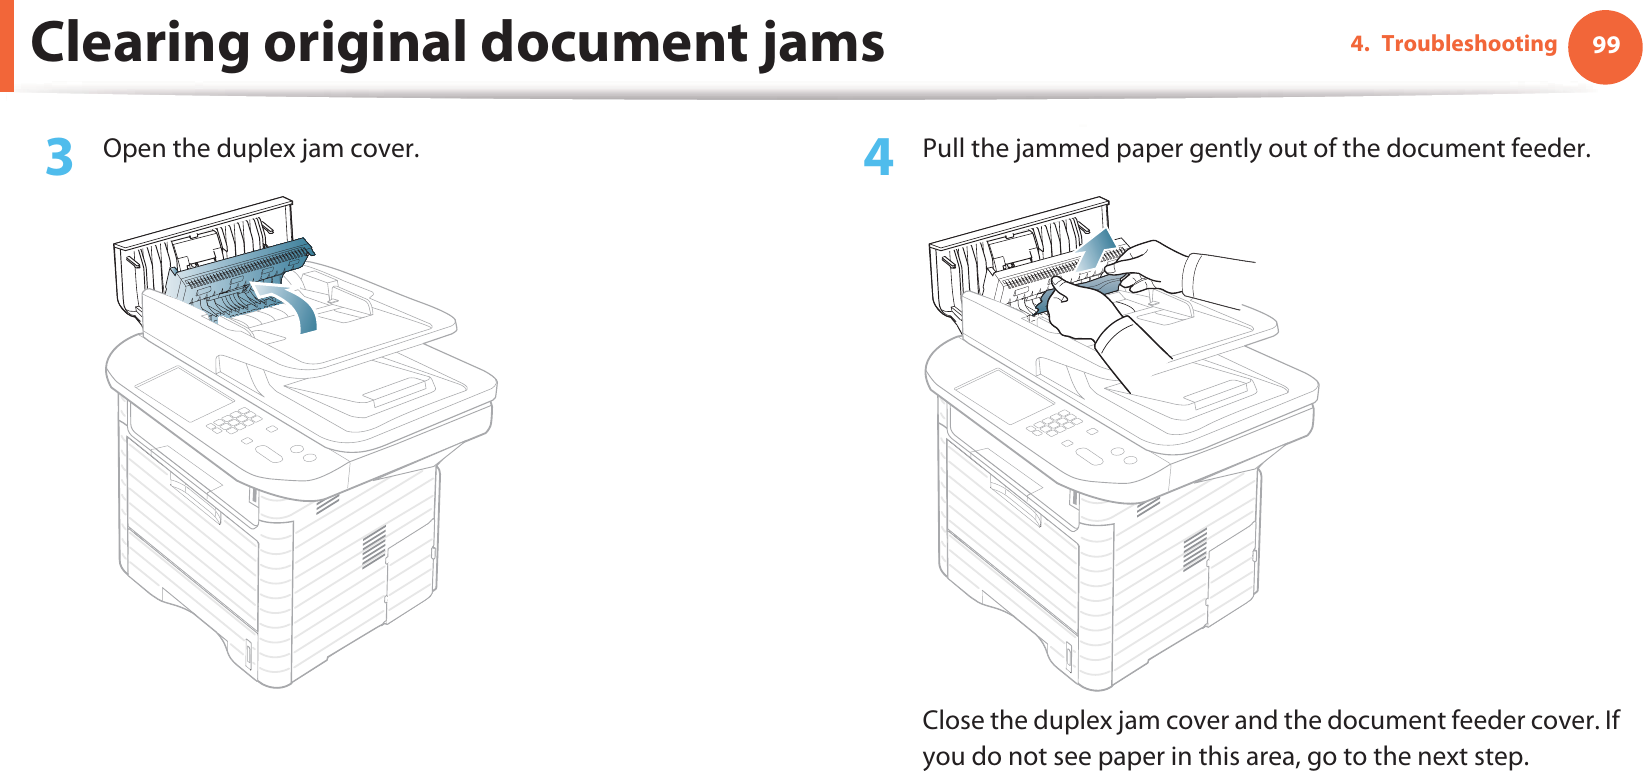 Clearing original document jams 994. Troubleshooting3  Open the duplex jam cover. 4  Pull the jammed paper gently out of the document feeder.Close the duplex jam cover and the document feeder cover. If you do not see paper in this area, go to the next step.